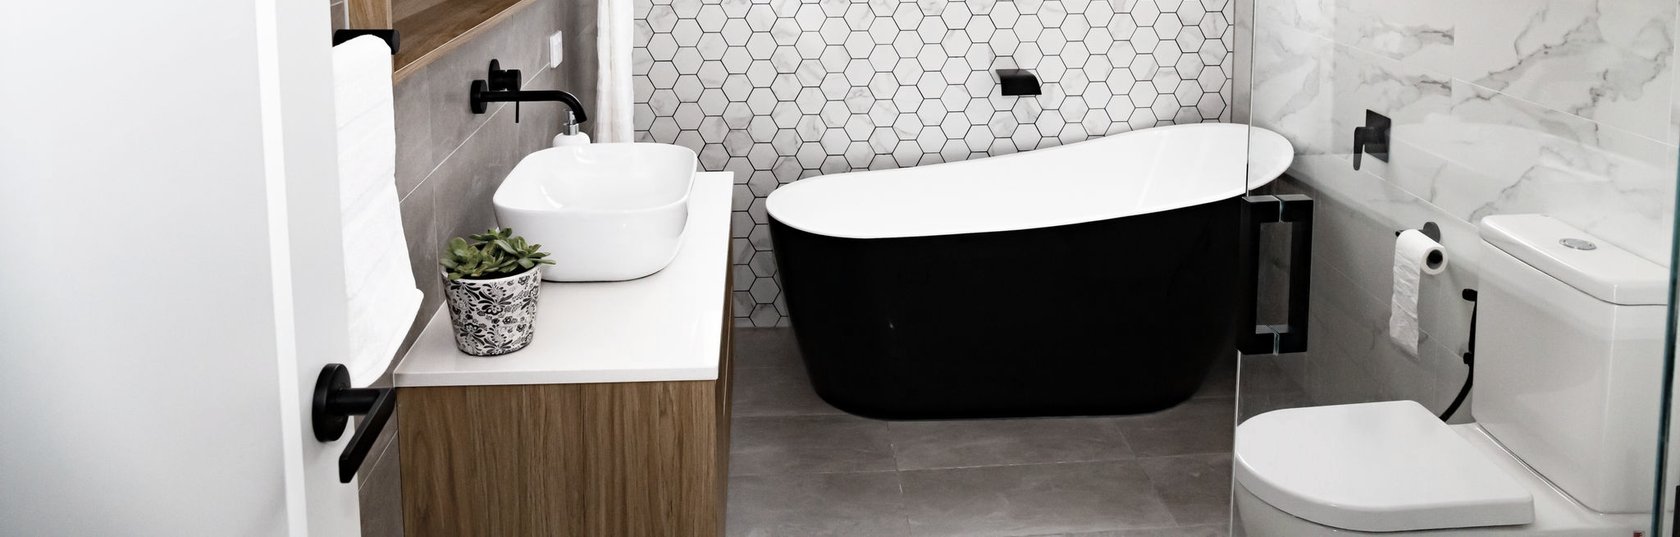 Renovating A Bathroom – Things You May Not Consider